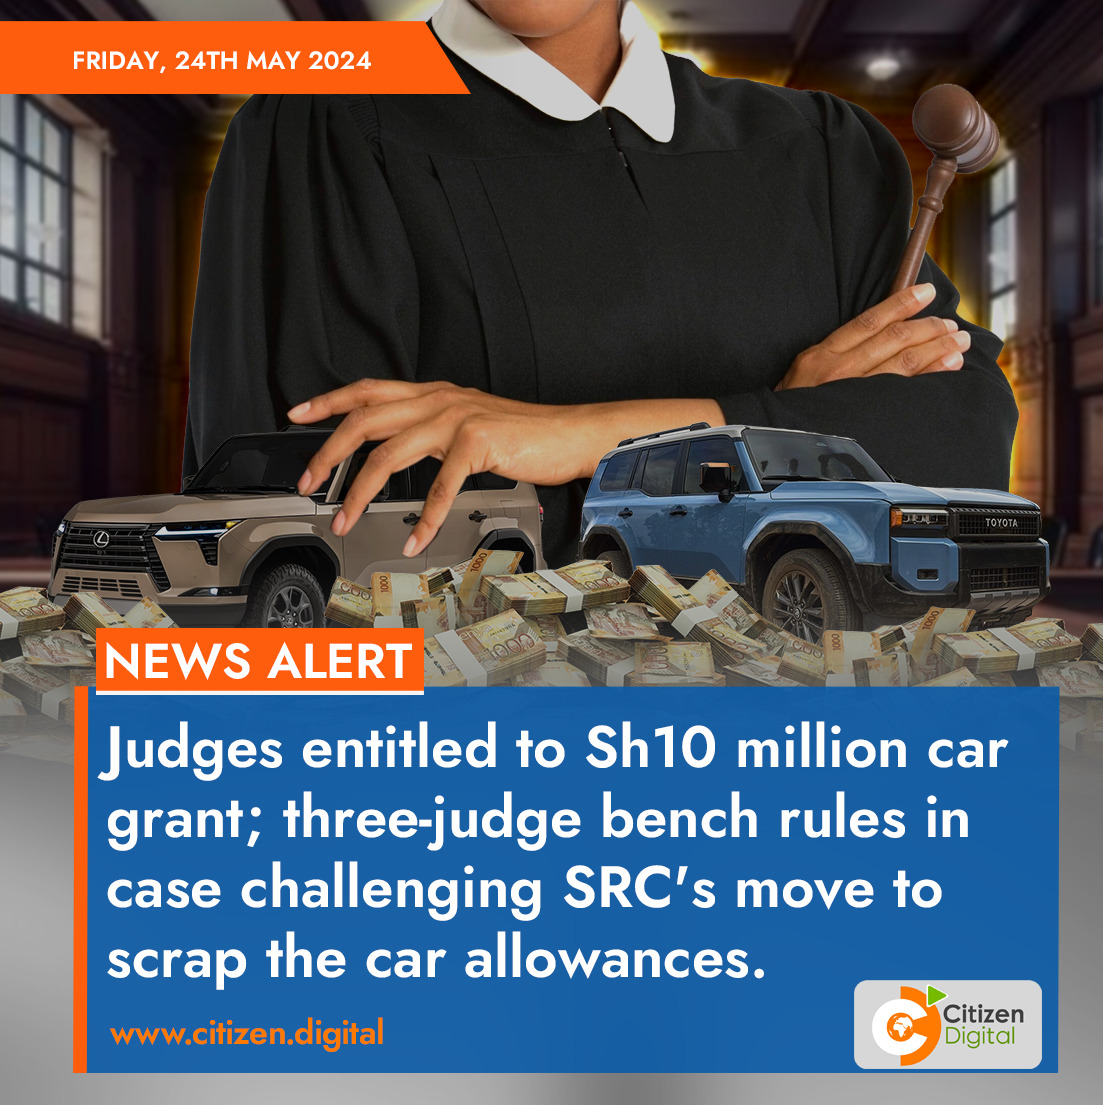 Judges entitled to Sh10 million car grant; three-judge bench rules in case challenging SRC's move to scrap the car allowances.